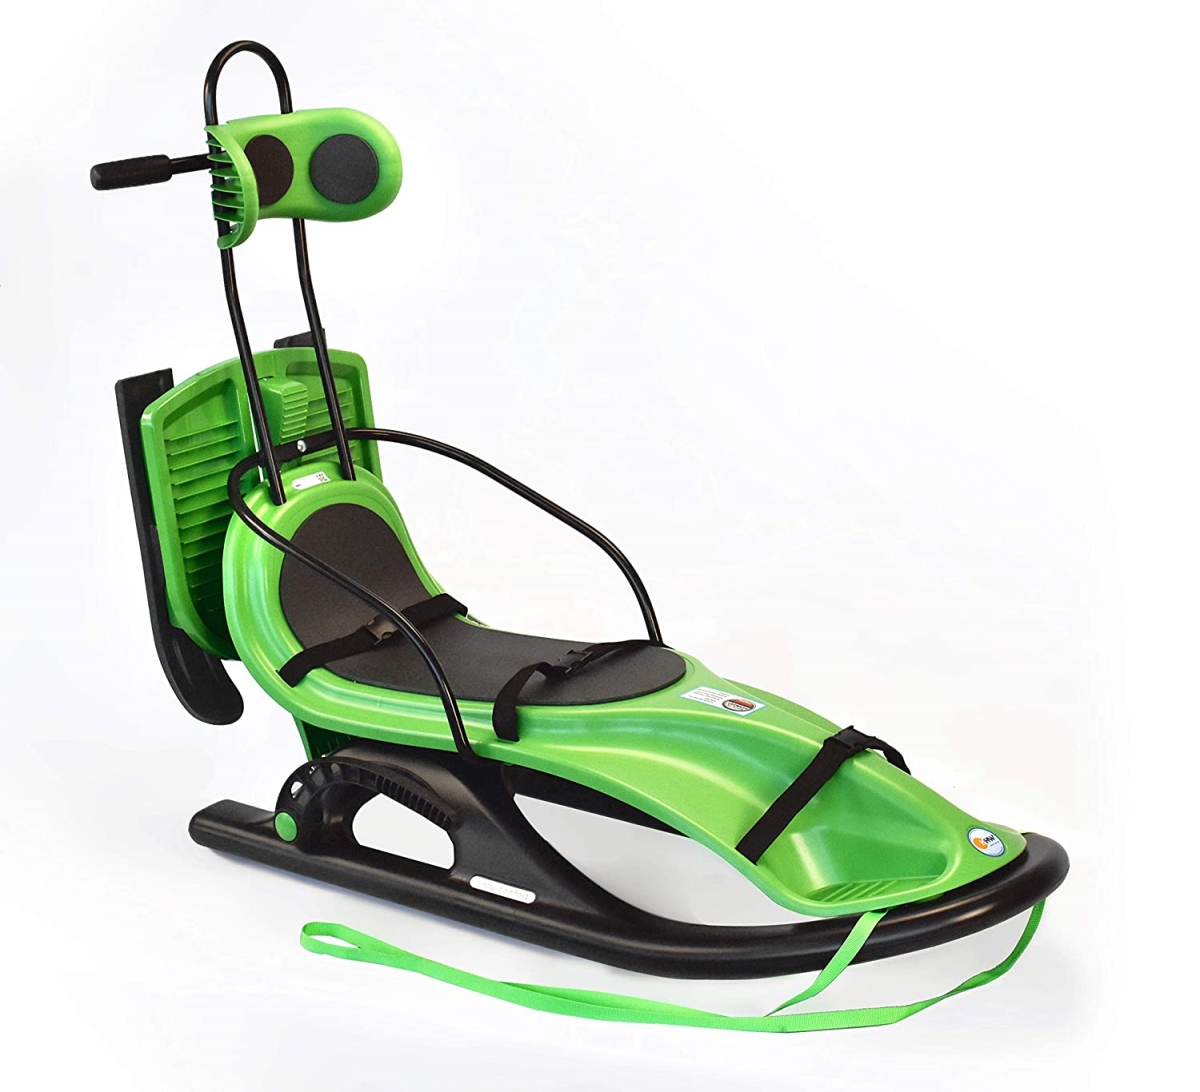 KHW 20314 Snow Comfort Sled - Green